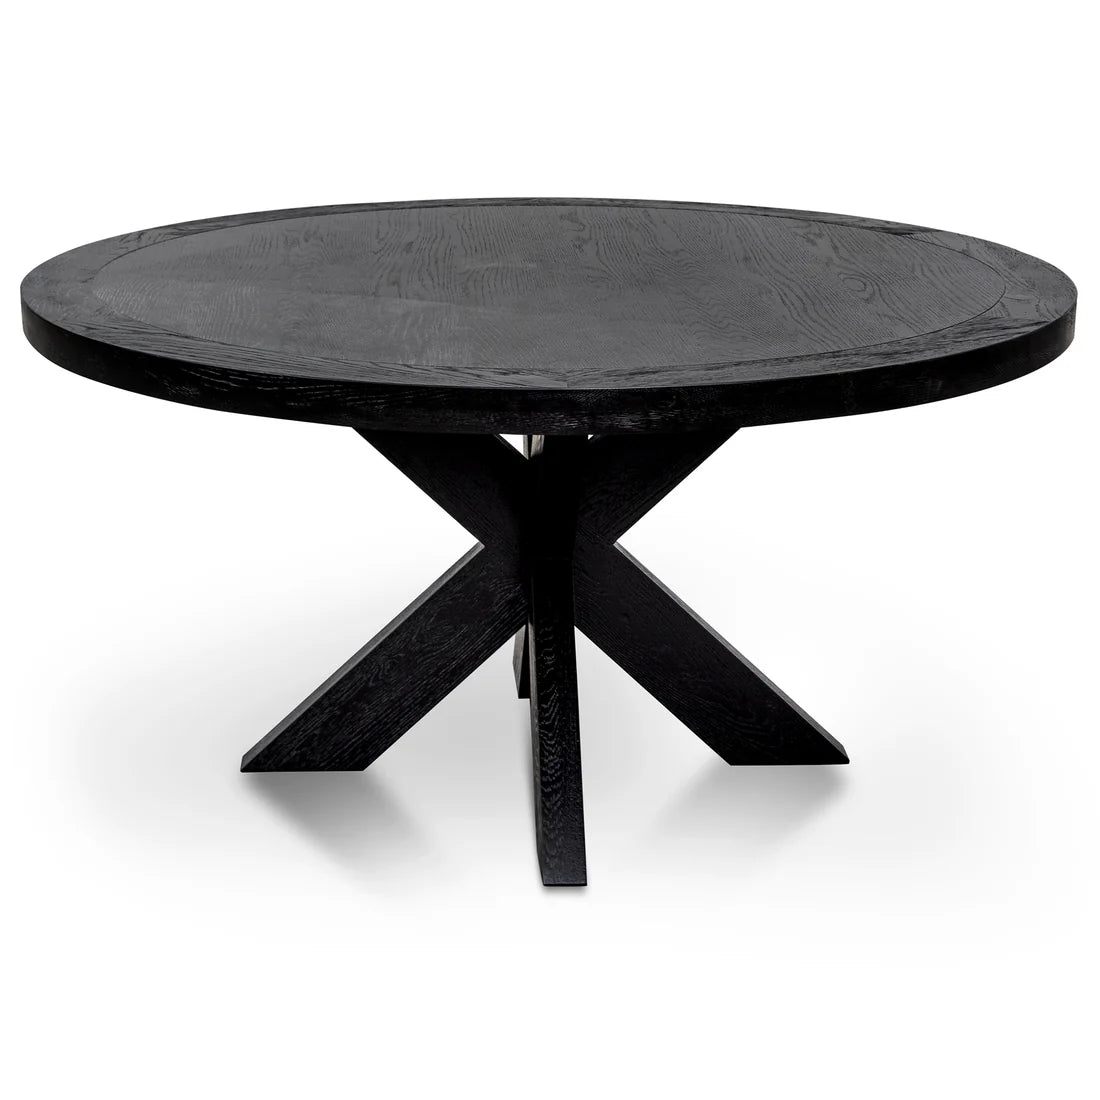 Montpellier | 4-6 Seater Black Natural Wooden Round Dining Table | Black